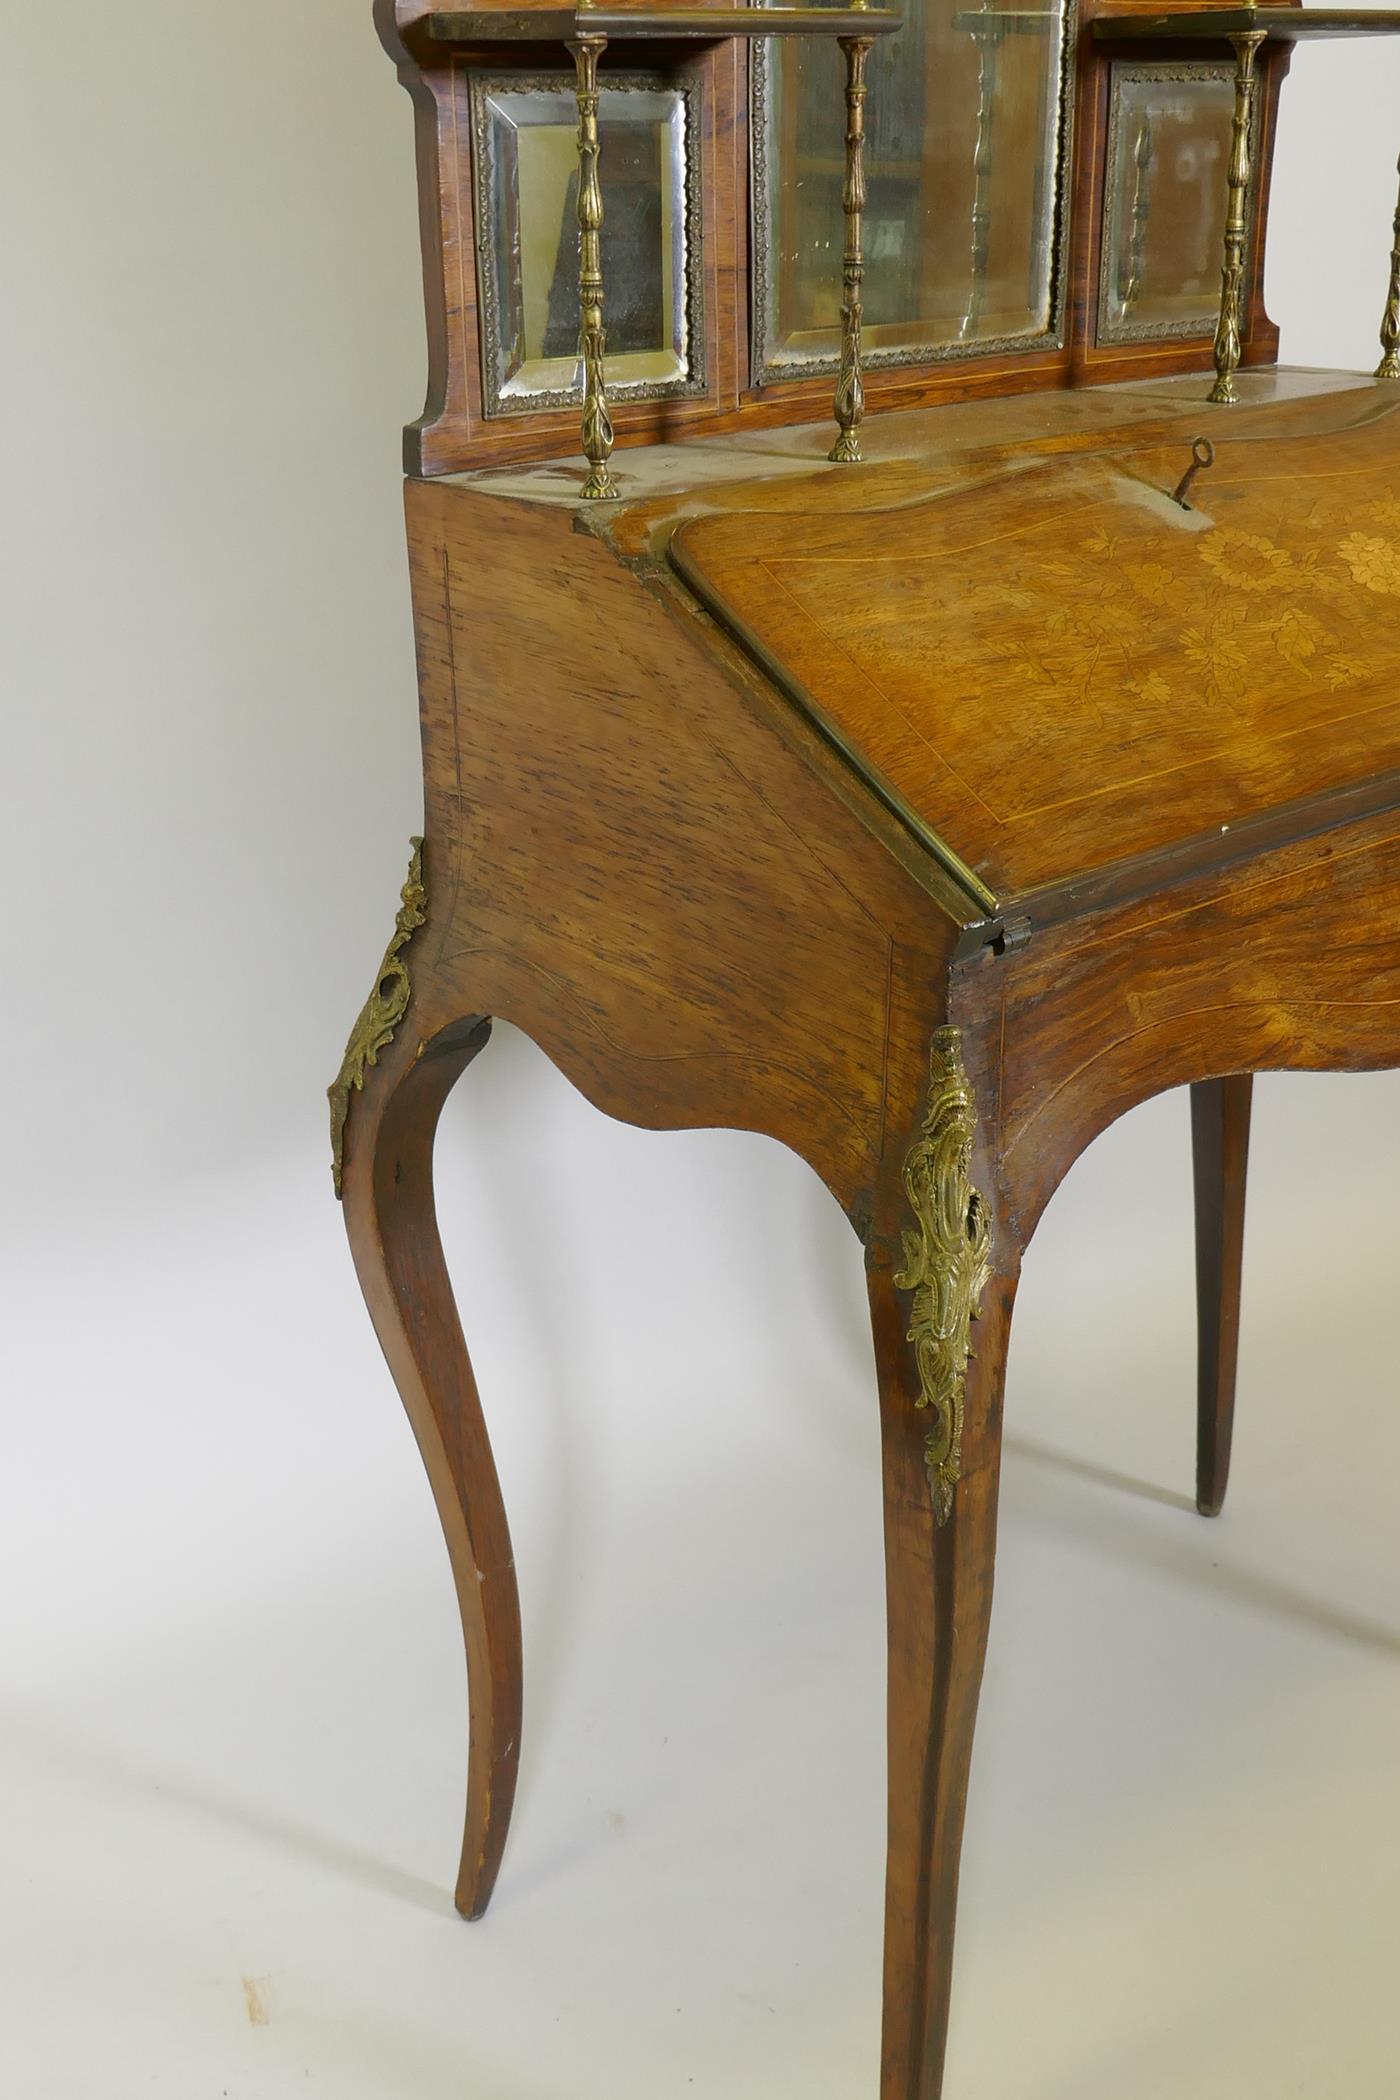 A C19th inlaid rosewood bureau de dame, with ormolu mounts, fall front and fitted interior, 31" x - Image 6 of 8